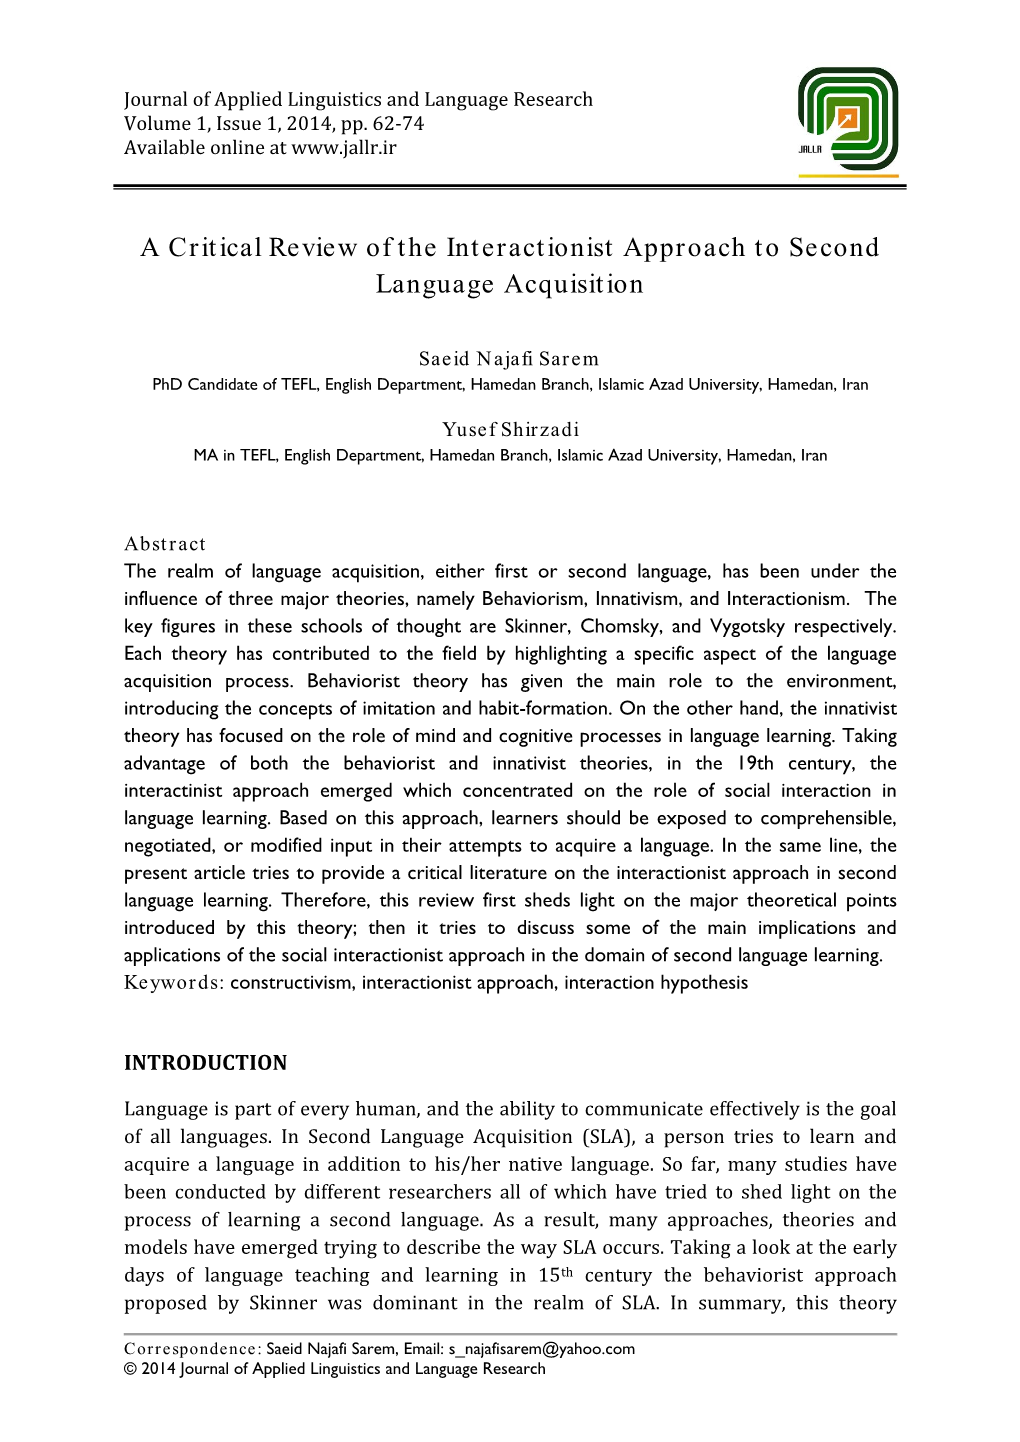 A Critical Review of the Interactionist Approach to Second Language Acquisition